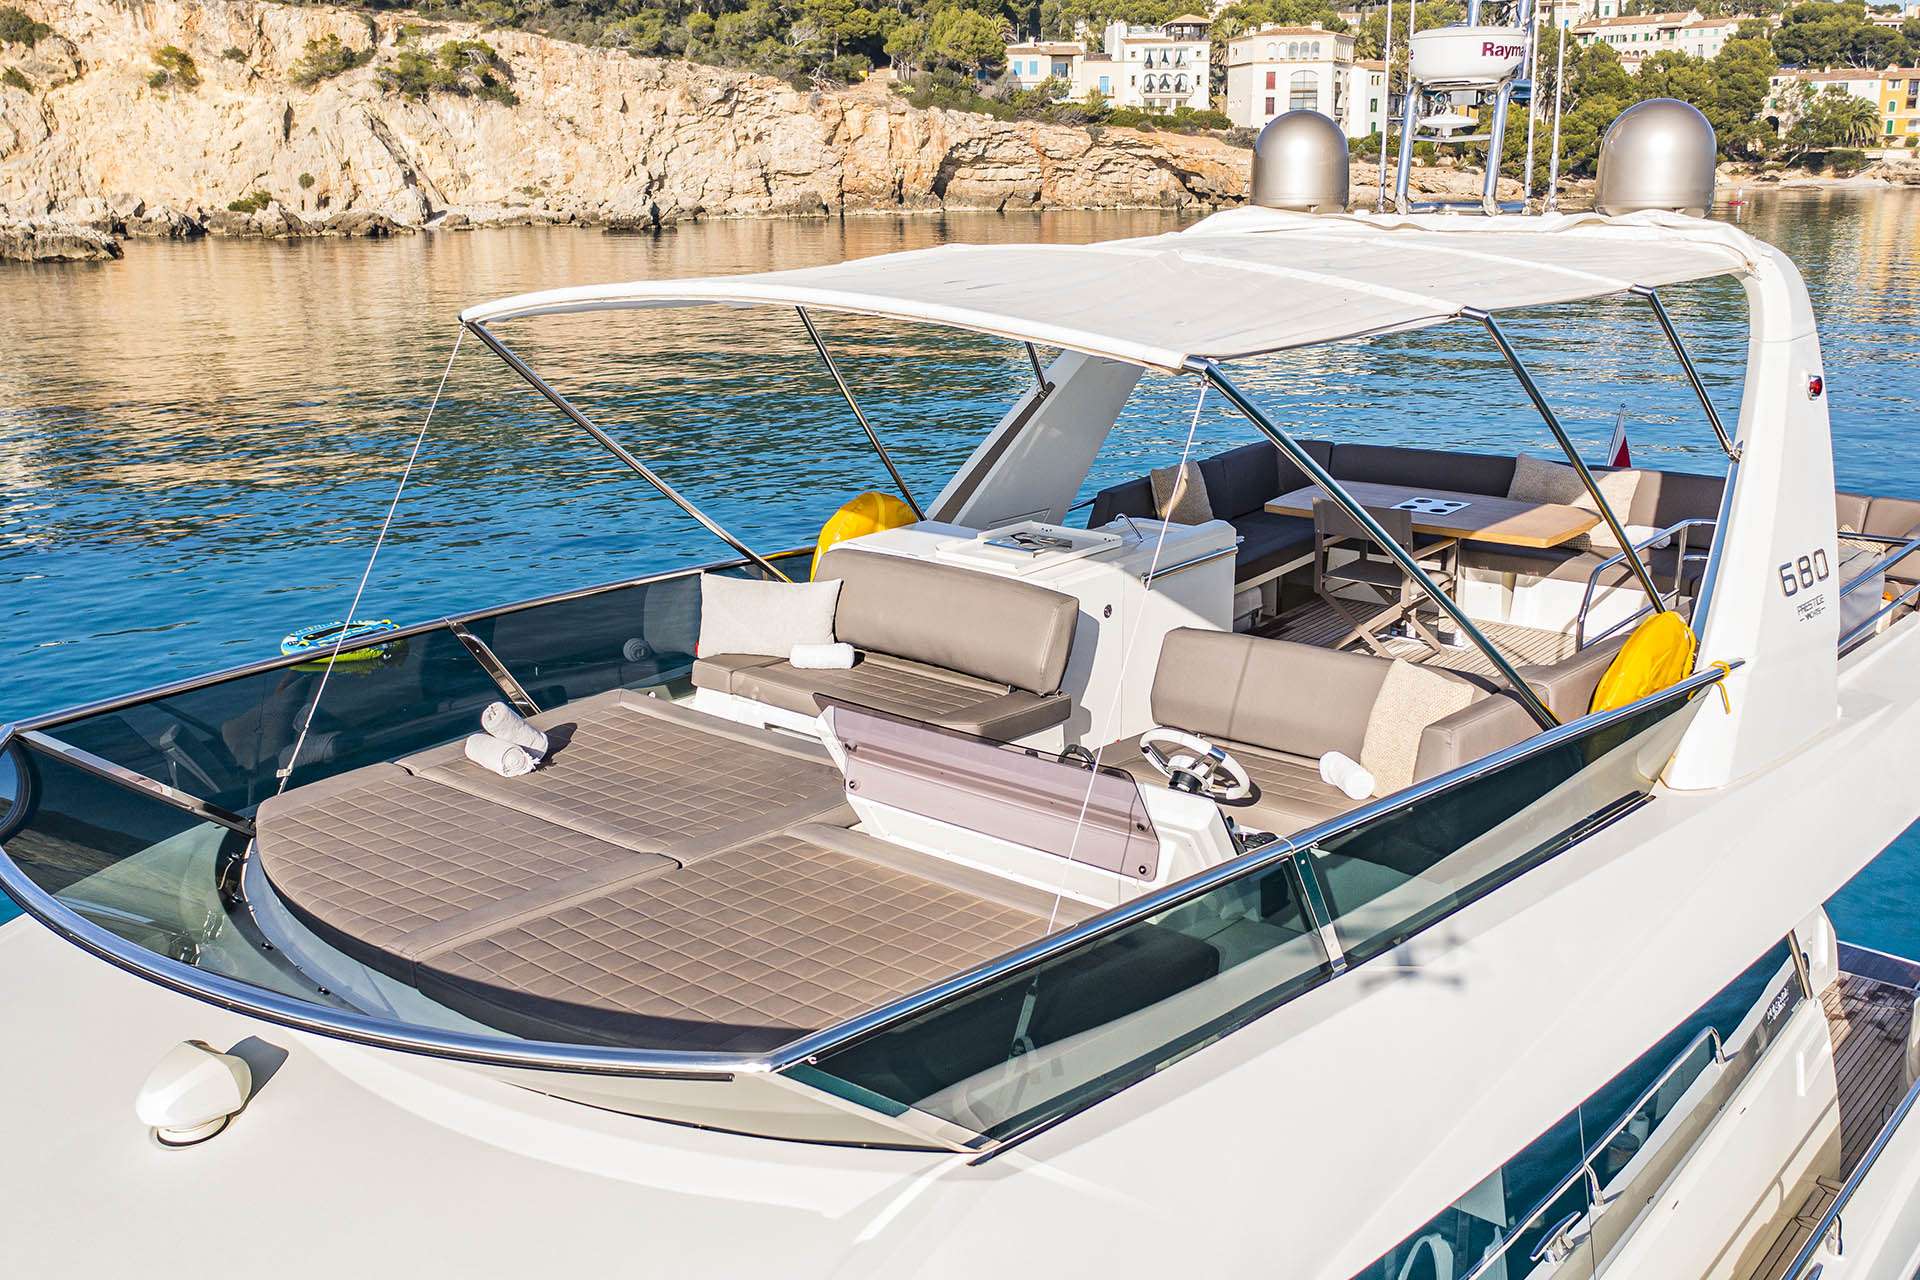 BLUE M - Yacht Charter Alcudia & Boat hire in W. Med -Naples/Sicily, W. Med -Riviera/Cors/Sard., W. Med - Spain/Balearics | Winter: Caribbean Virgin Islands (US/BVI), Caribbean Leewards, Caribbean Windwards 4